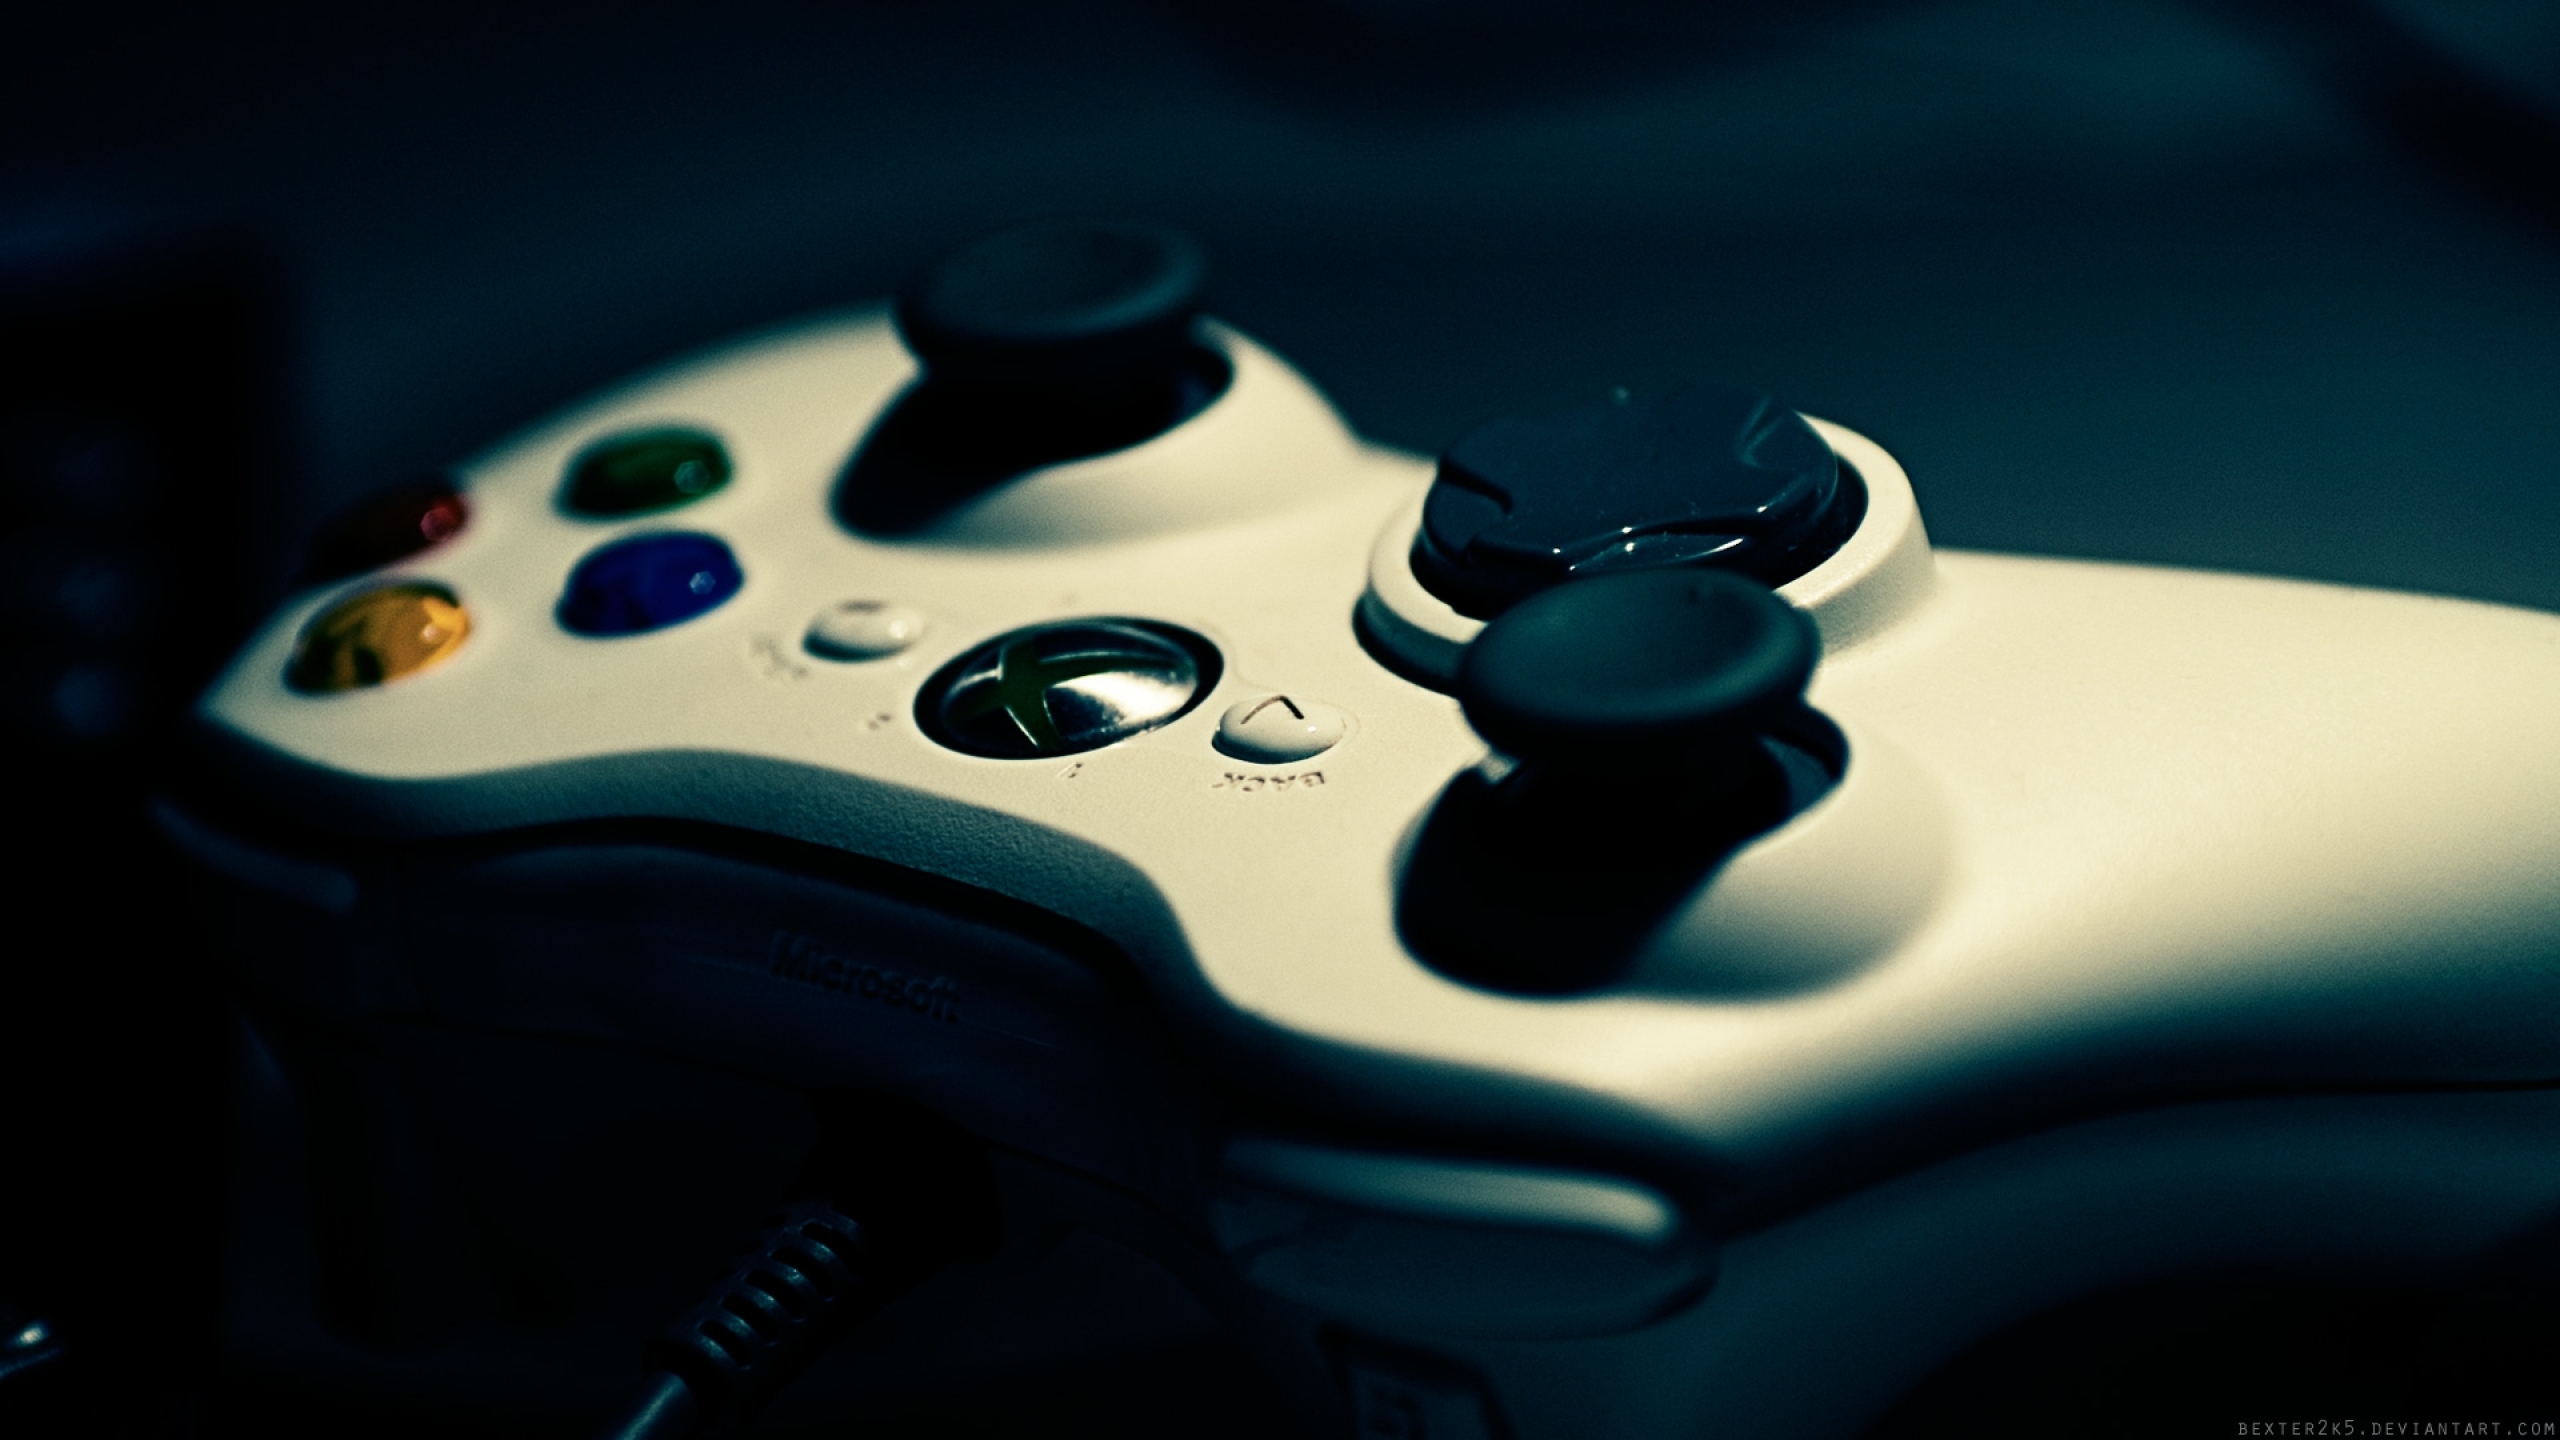 Xbox Controllers Wallpaper